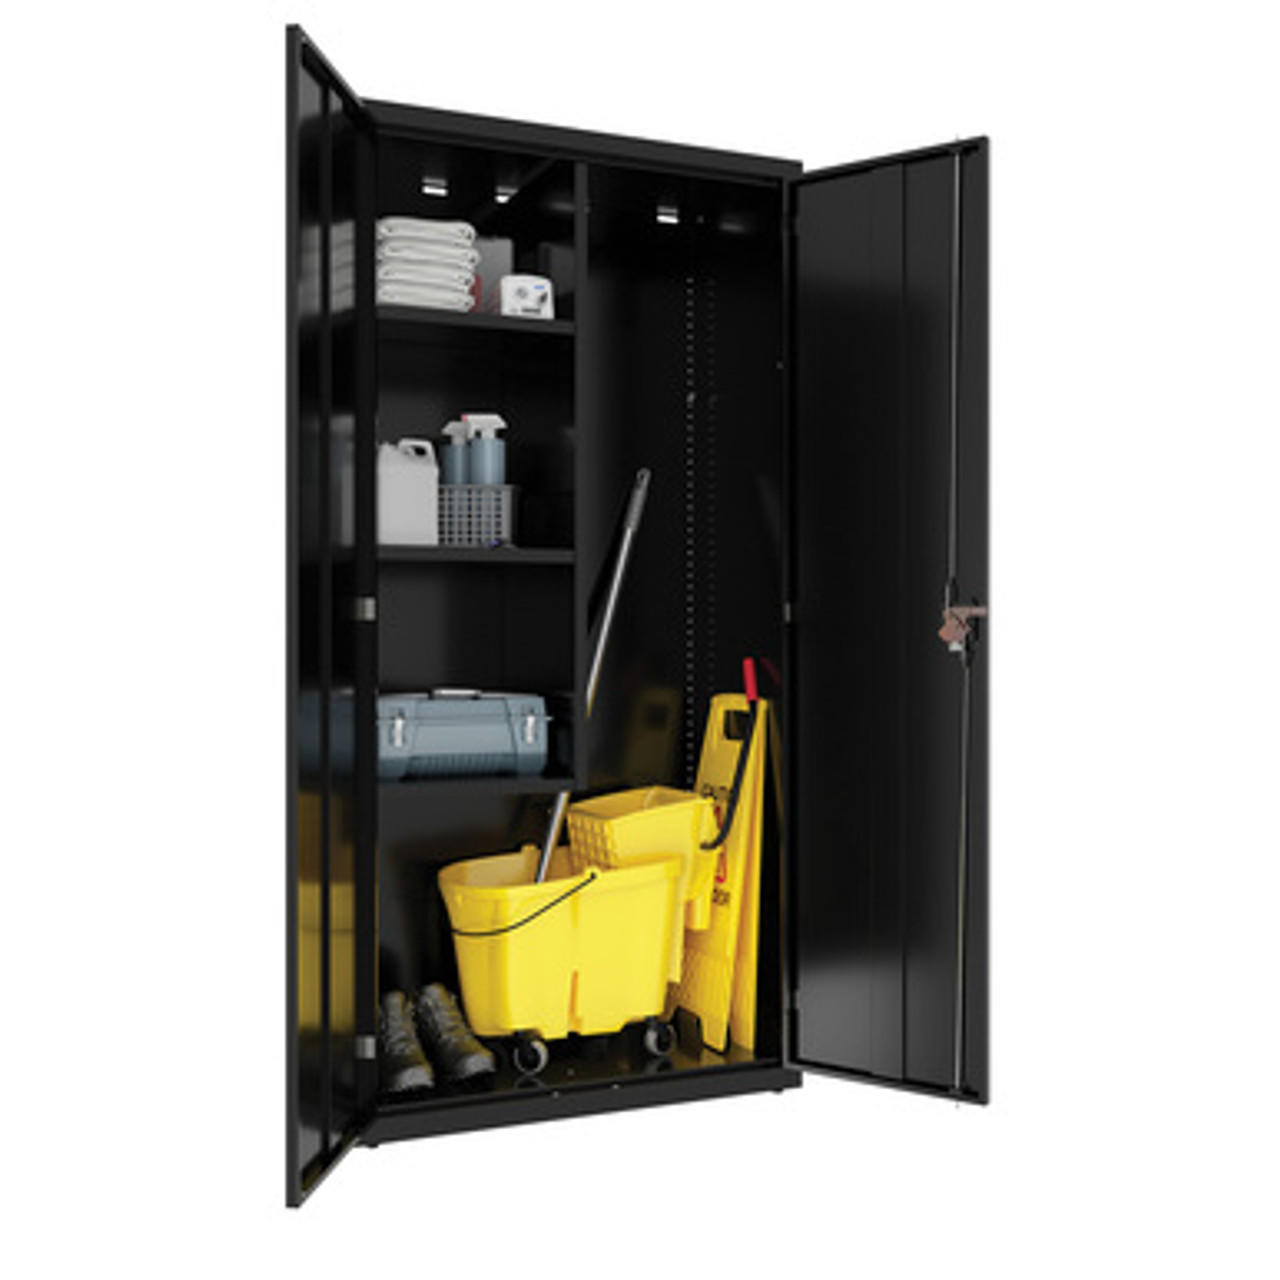  Office Source Steel Janitor Storage Cabinet OFJC3672 